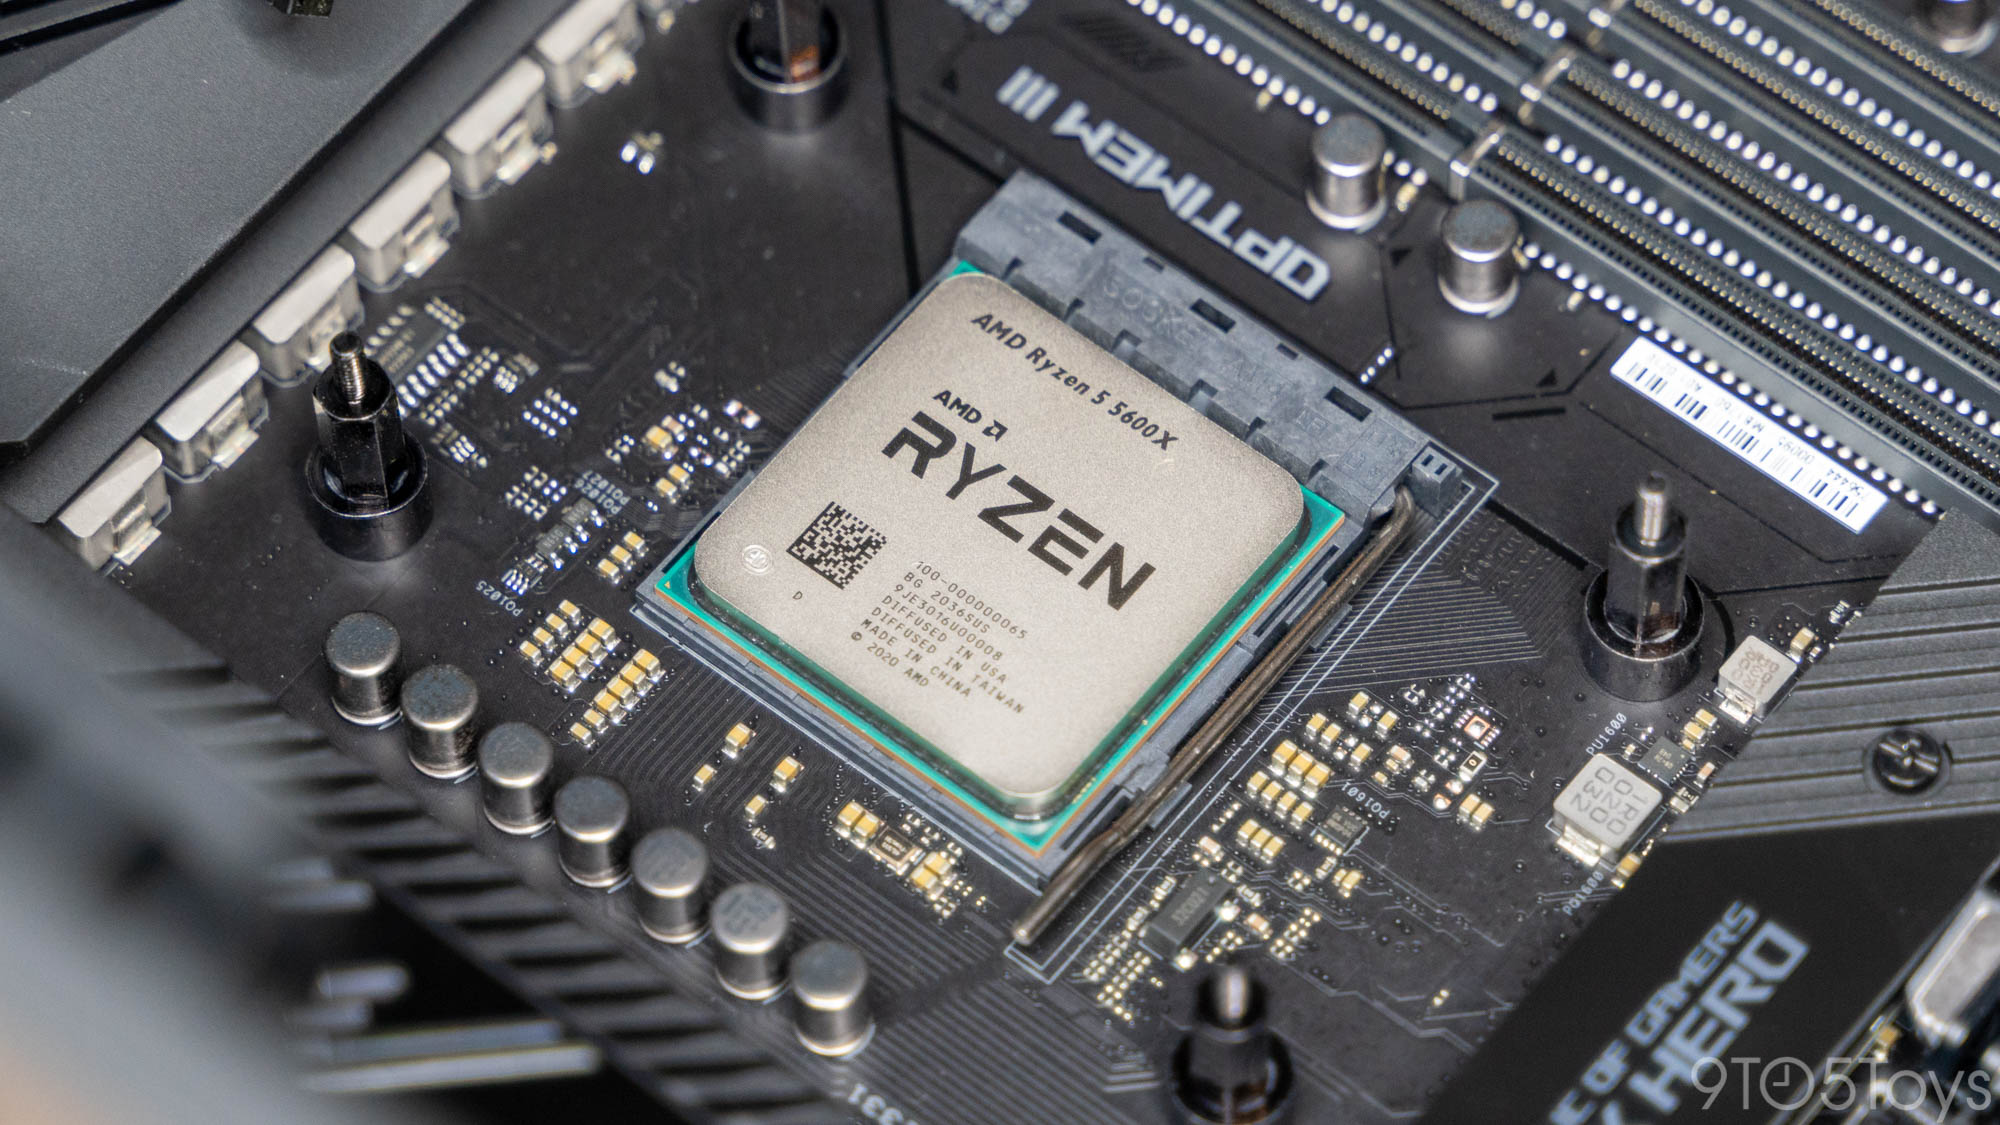 Ryzen 5 5600X Review: Entry-level with great performance - 9to5Toys